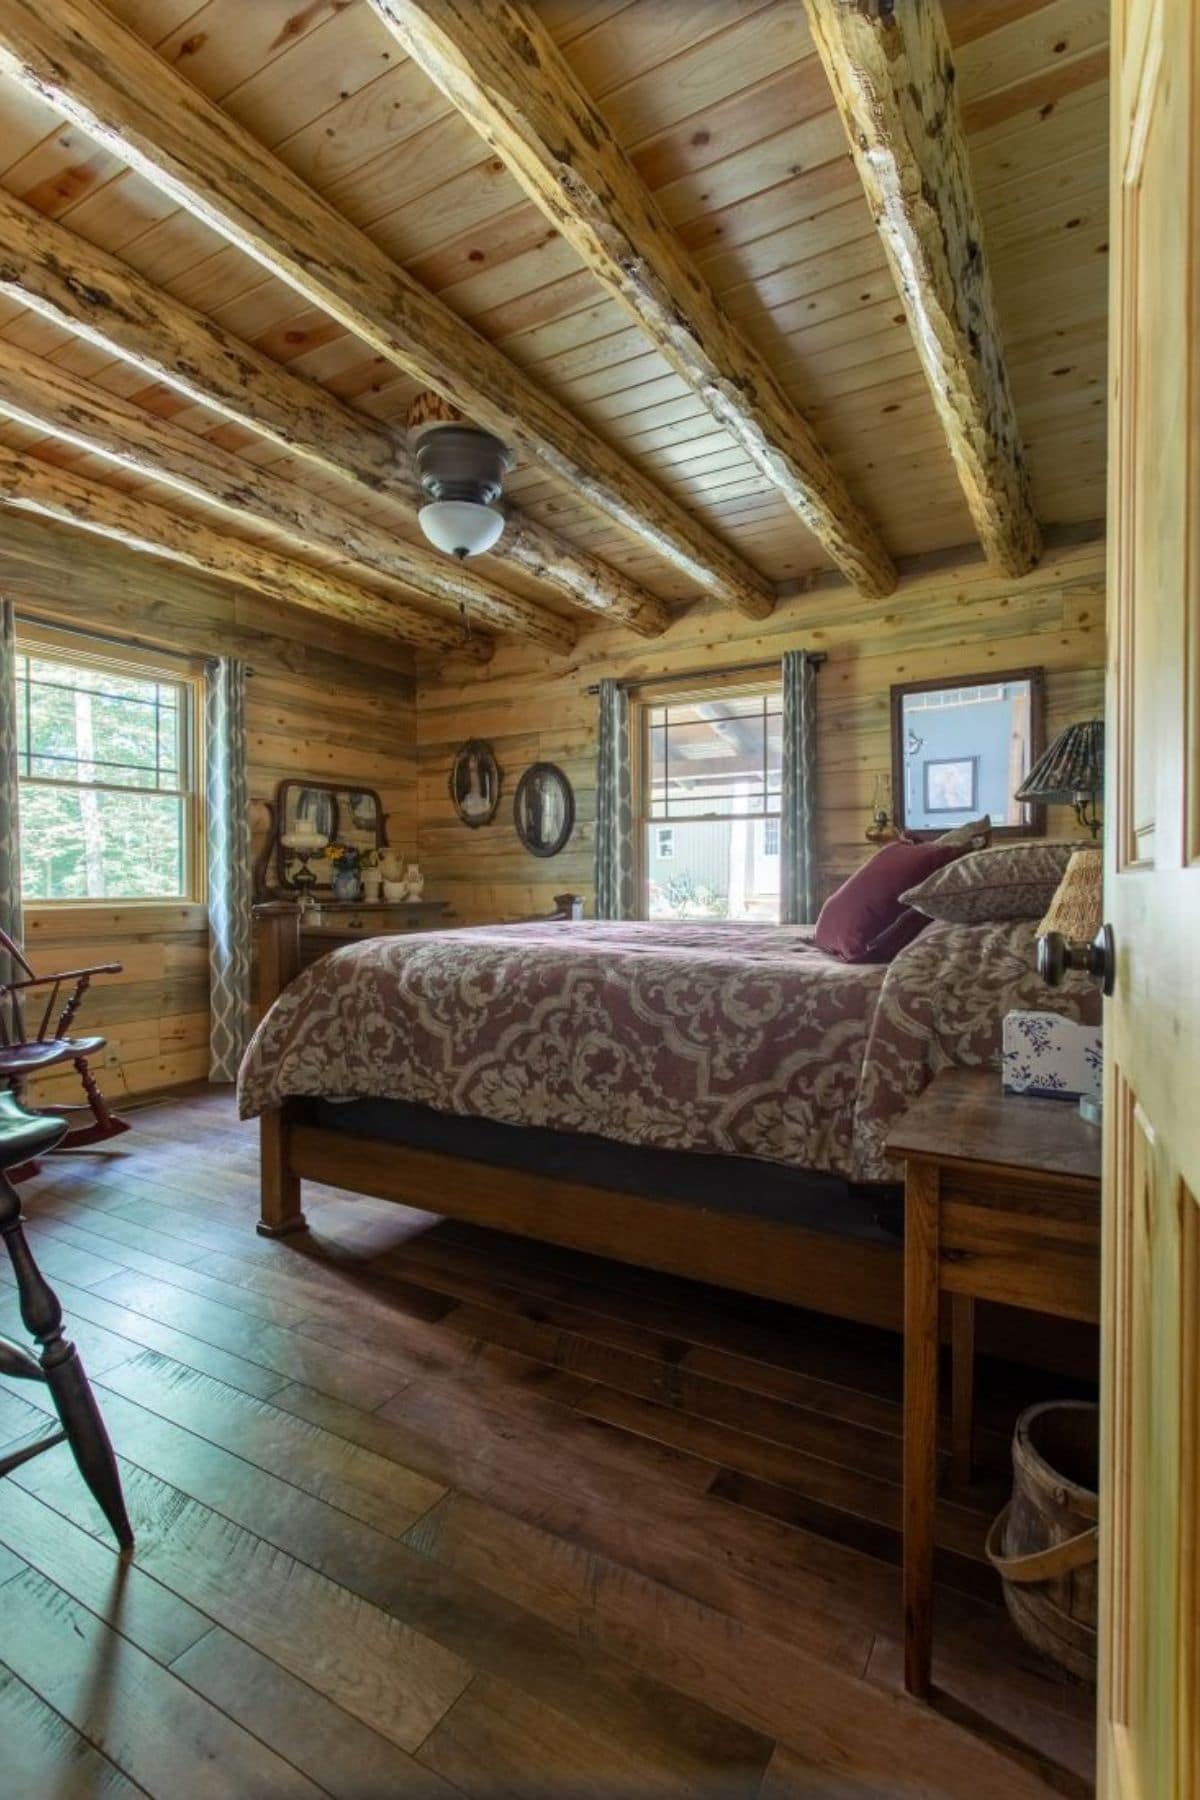 bed against right wall with windows on all walls in log cabin